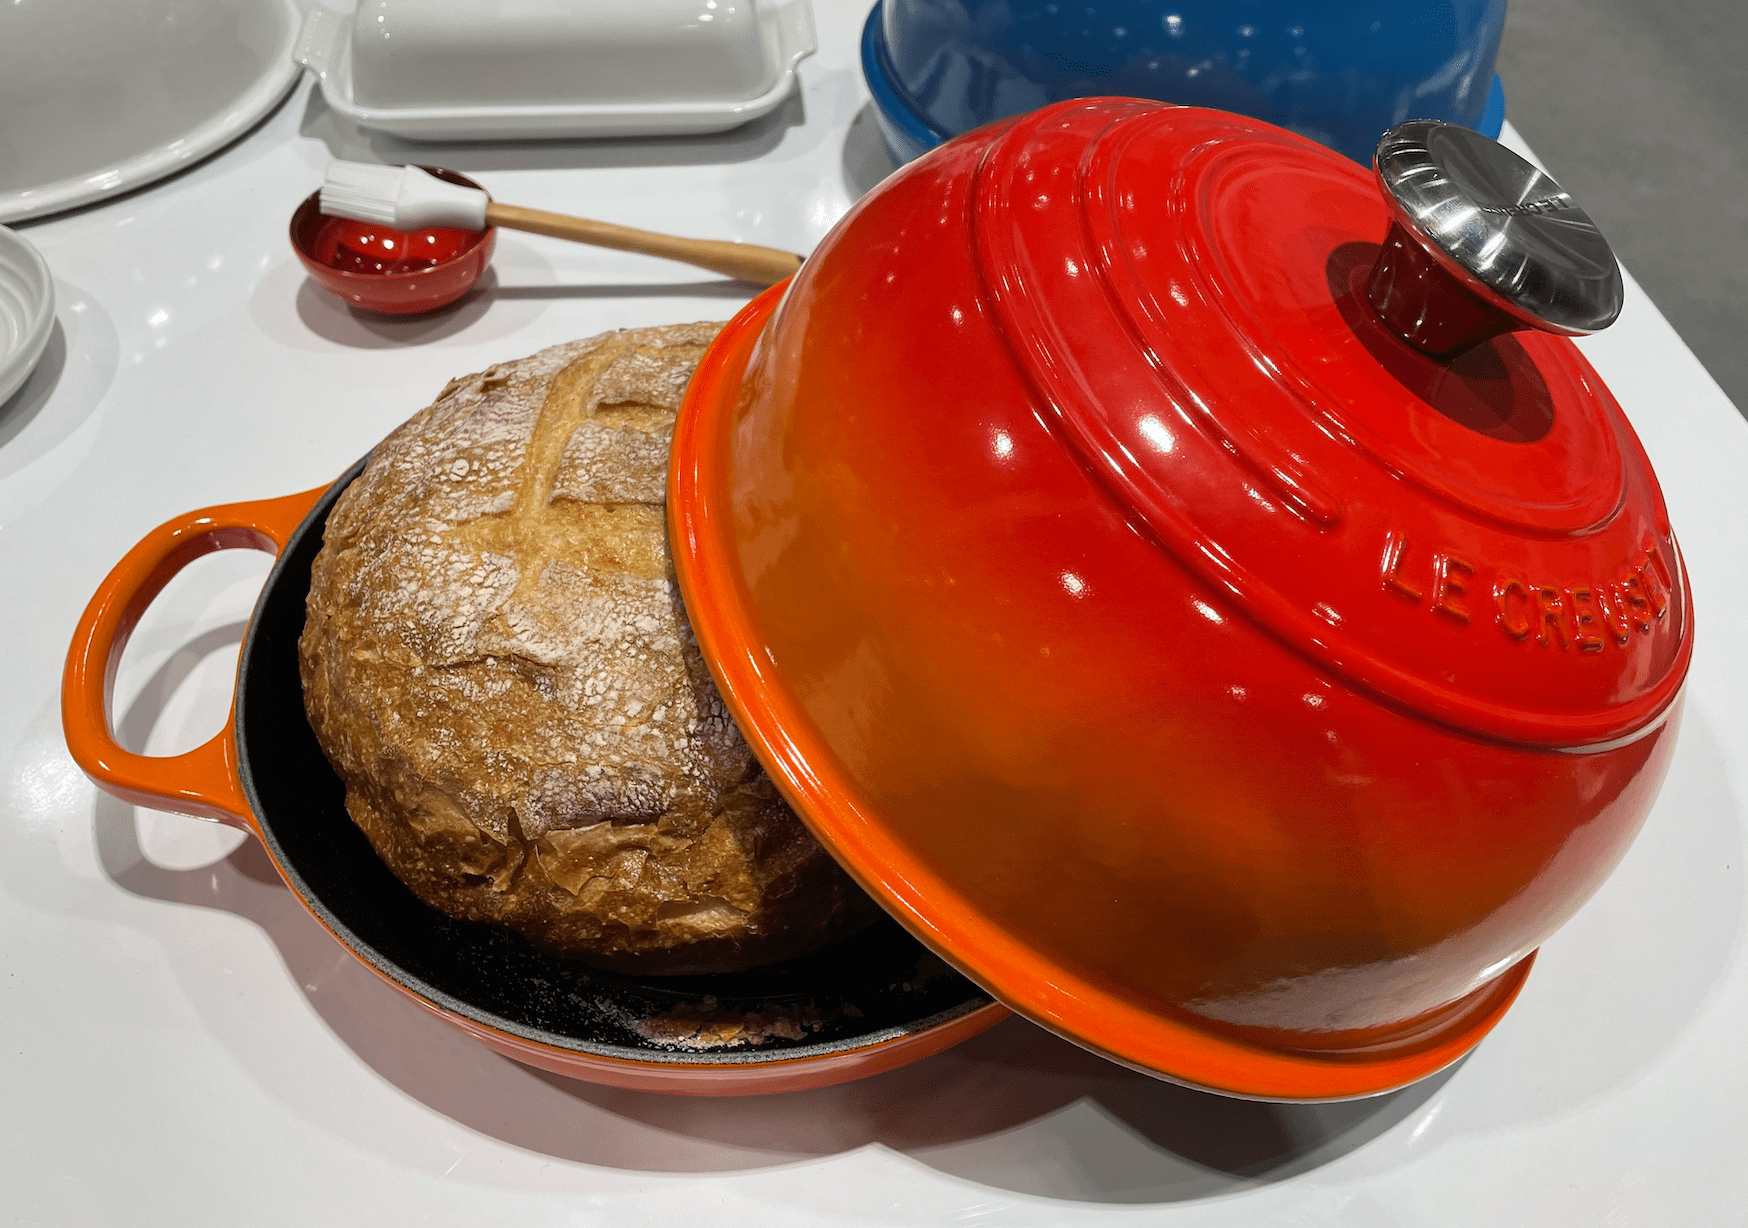 Was gifted the Le Creuset bread oven for Christmas. Tried the basic